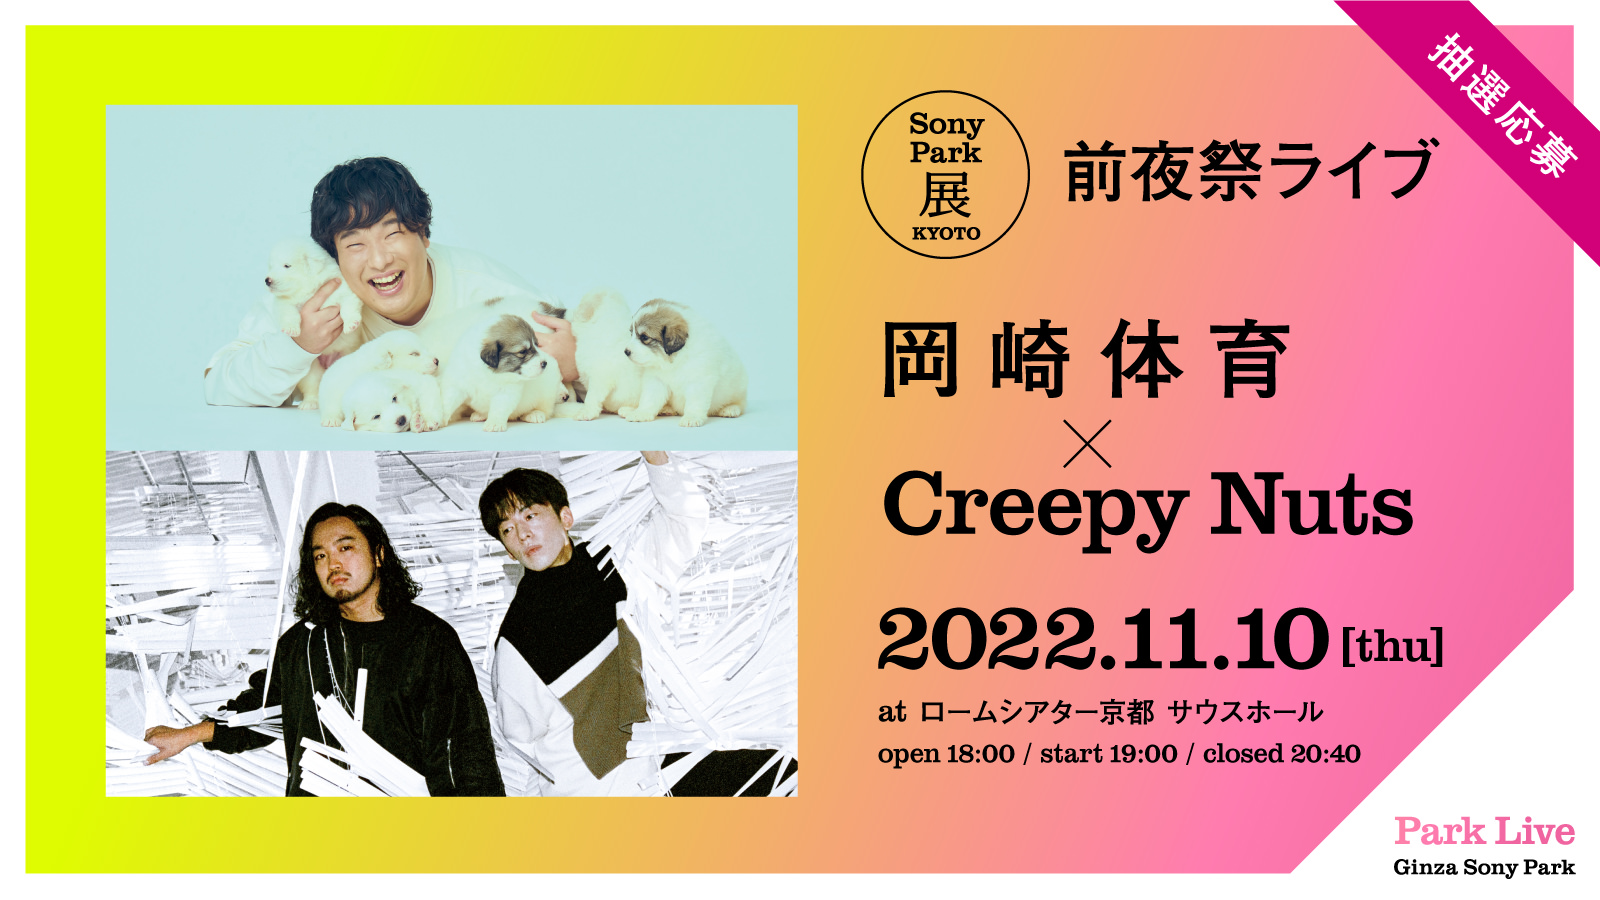 Sony Park展 KYOTO　前夜祭ライブ　岡崎体育×Creepy Nuts / 2021.9.29 [Wed] 22:00 online